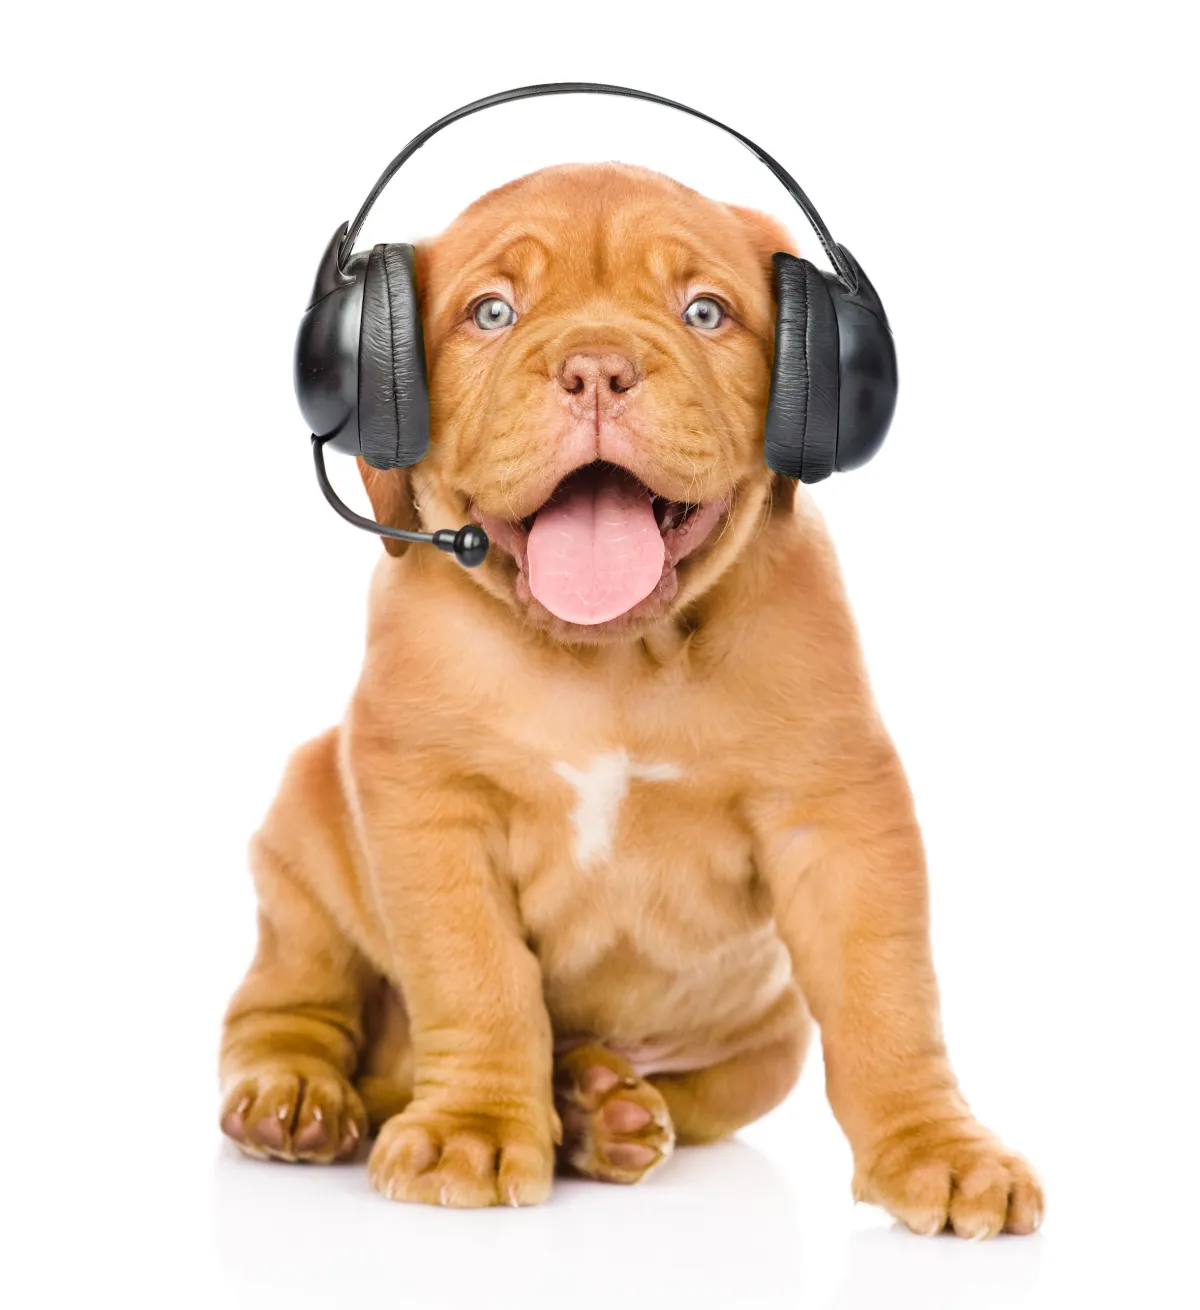 Puppy with a headset